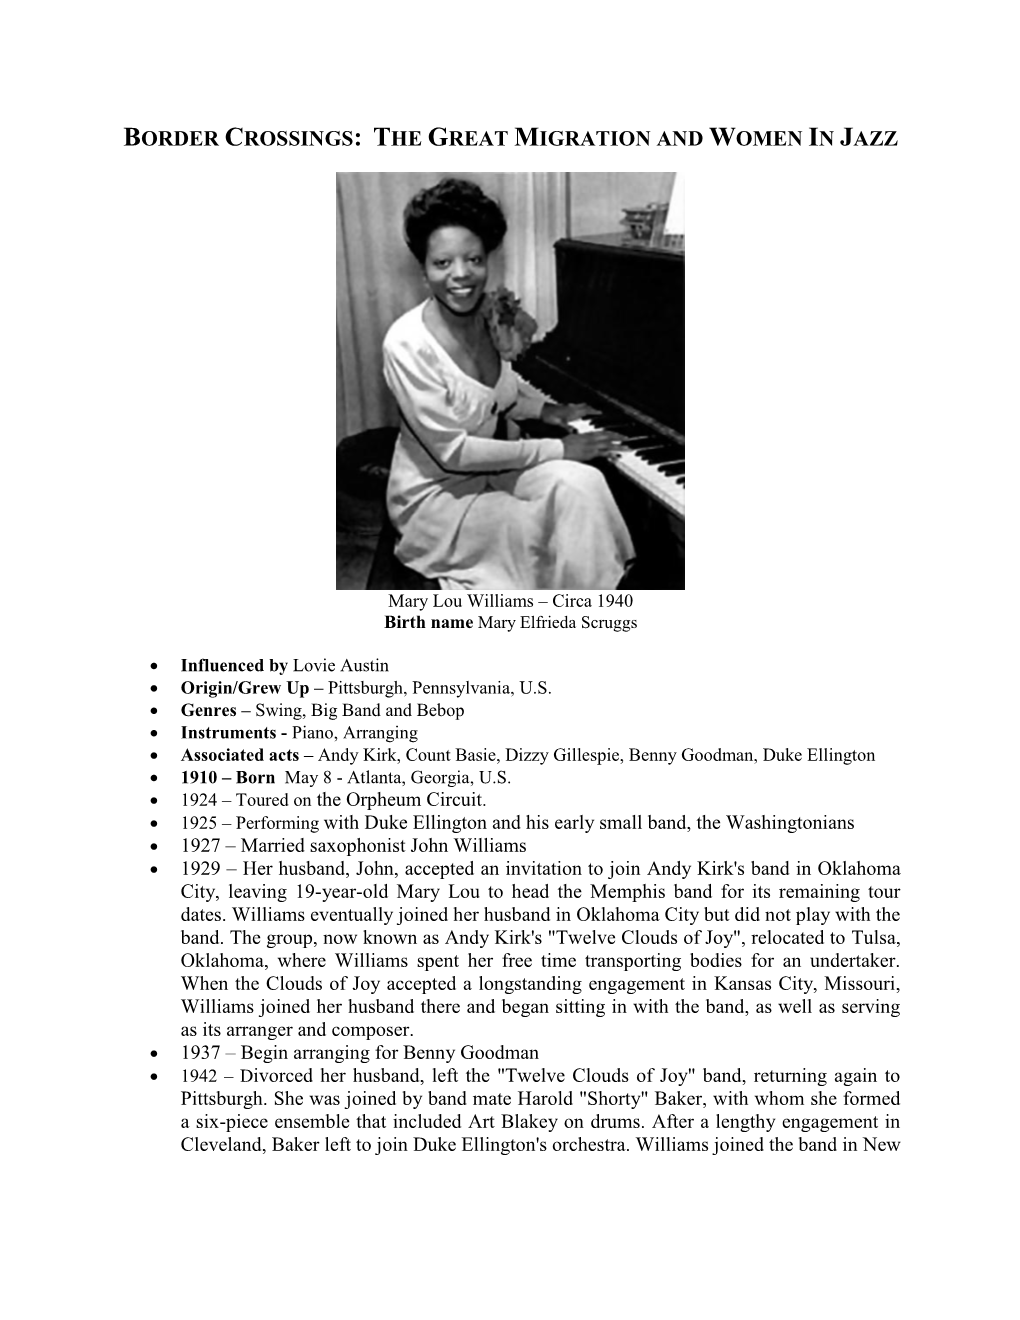 The Great Migration and Women in Jazz